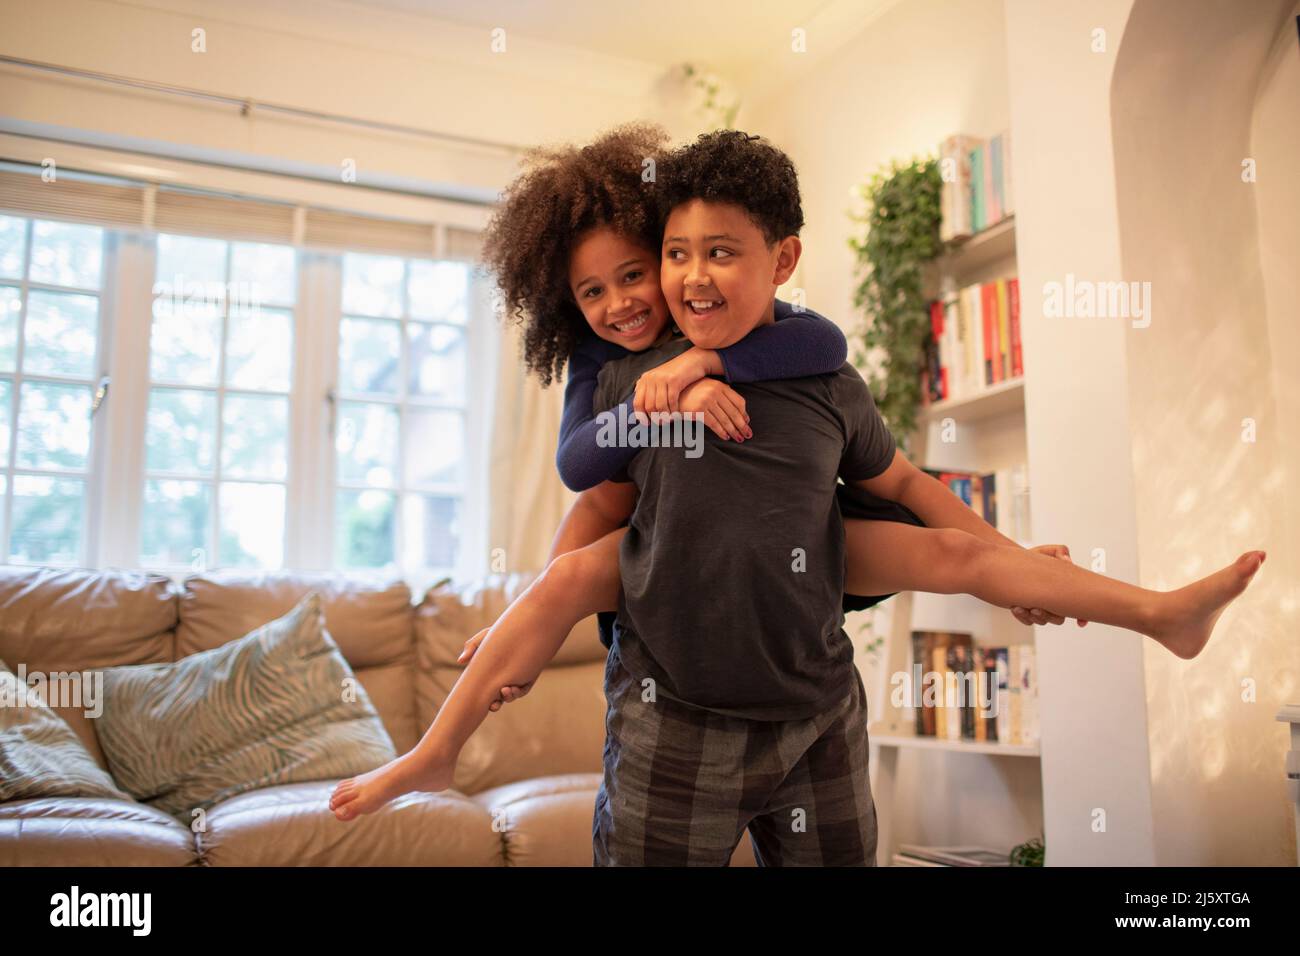 Portrait happy brother piggybacking sister in living room Stock Photo